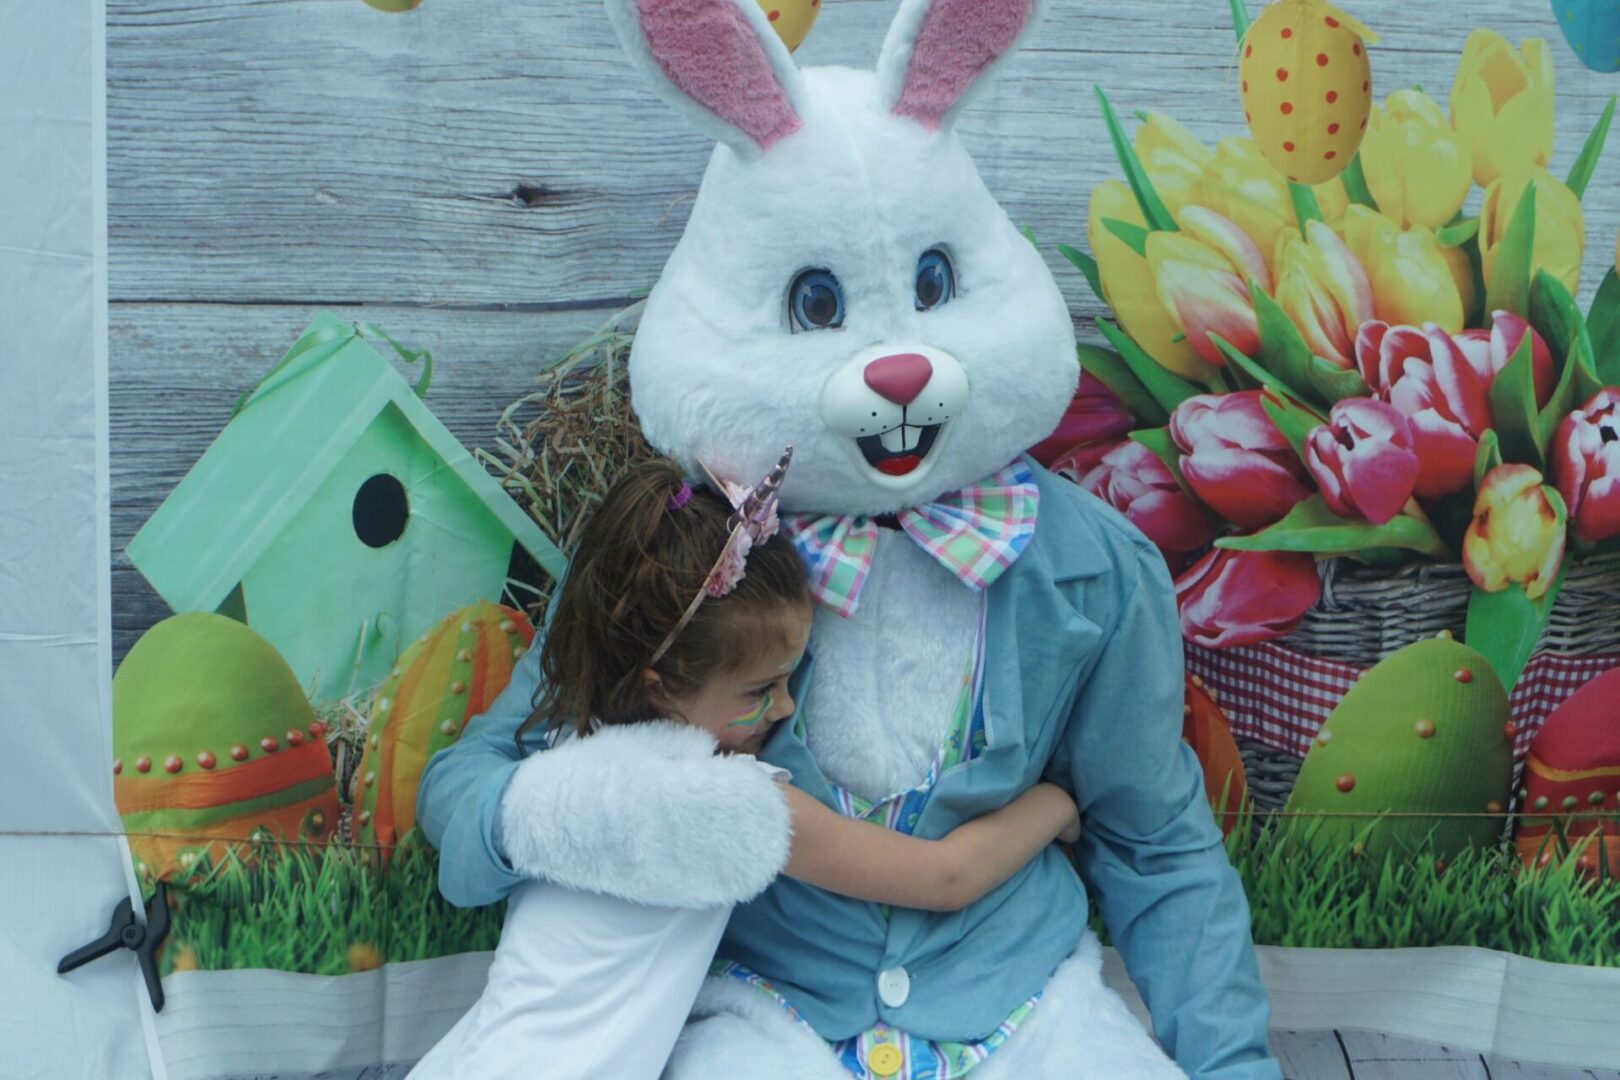 A girl with a face paint and unicorn headband hugging the bunny mascot (1)